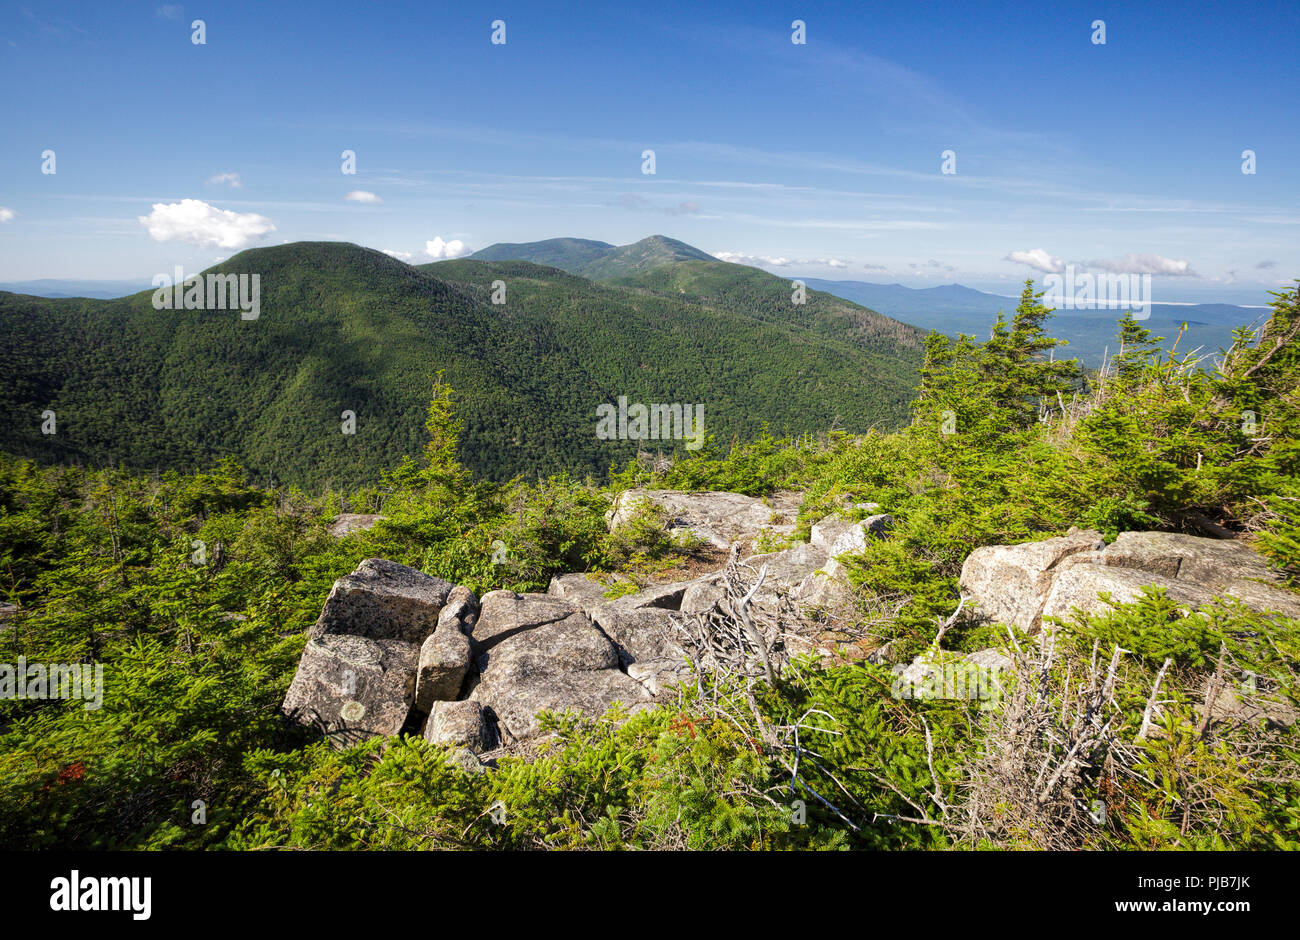 View of mountain landscape from along the Mittersill-Cannon Trail on Mittersill Mountain in the New Hampshire White Mountains during the summer months Stock Photo